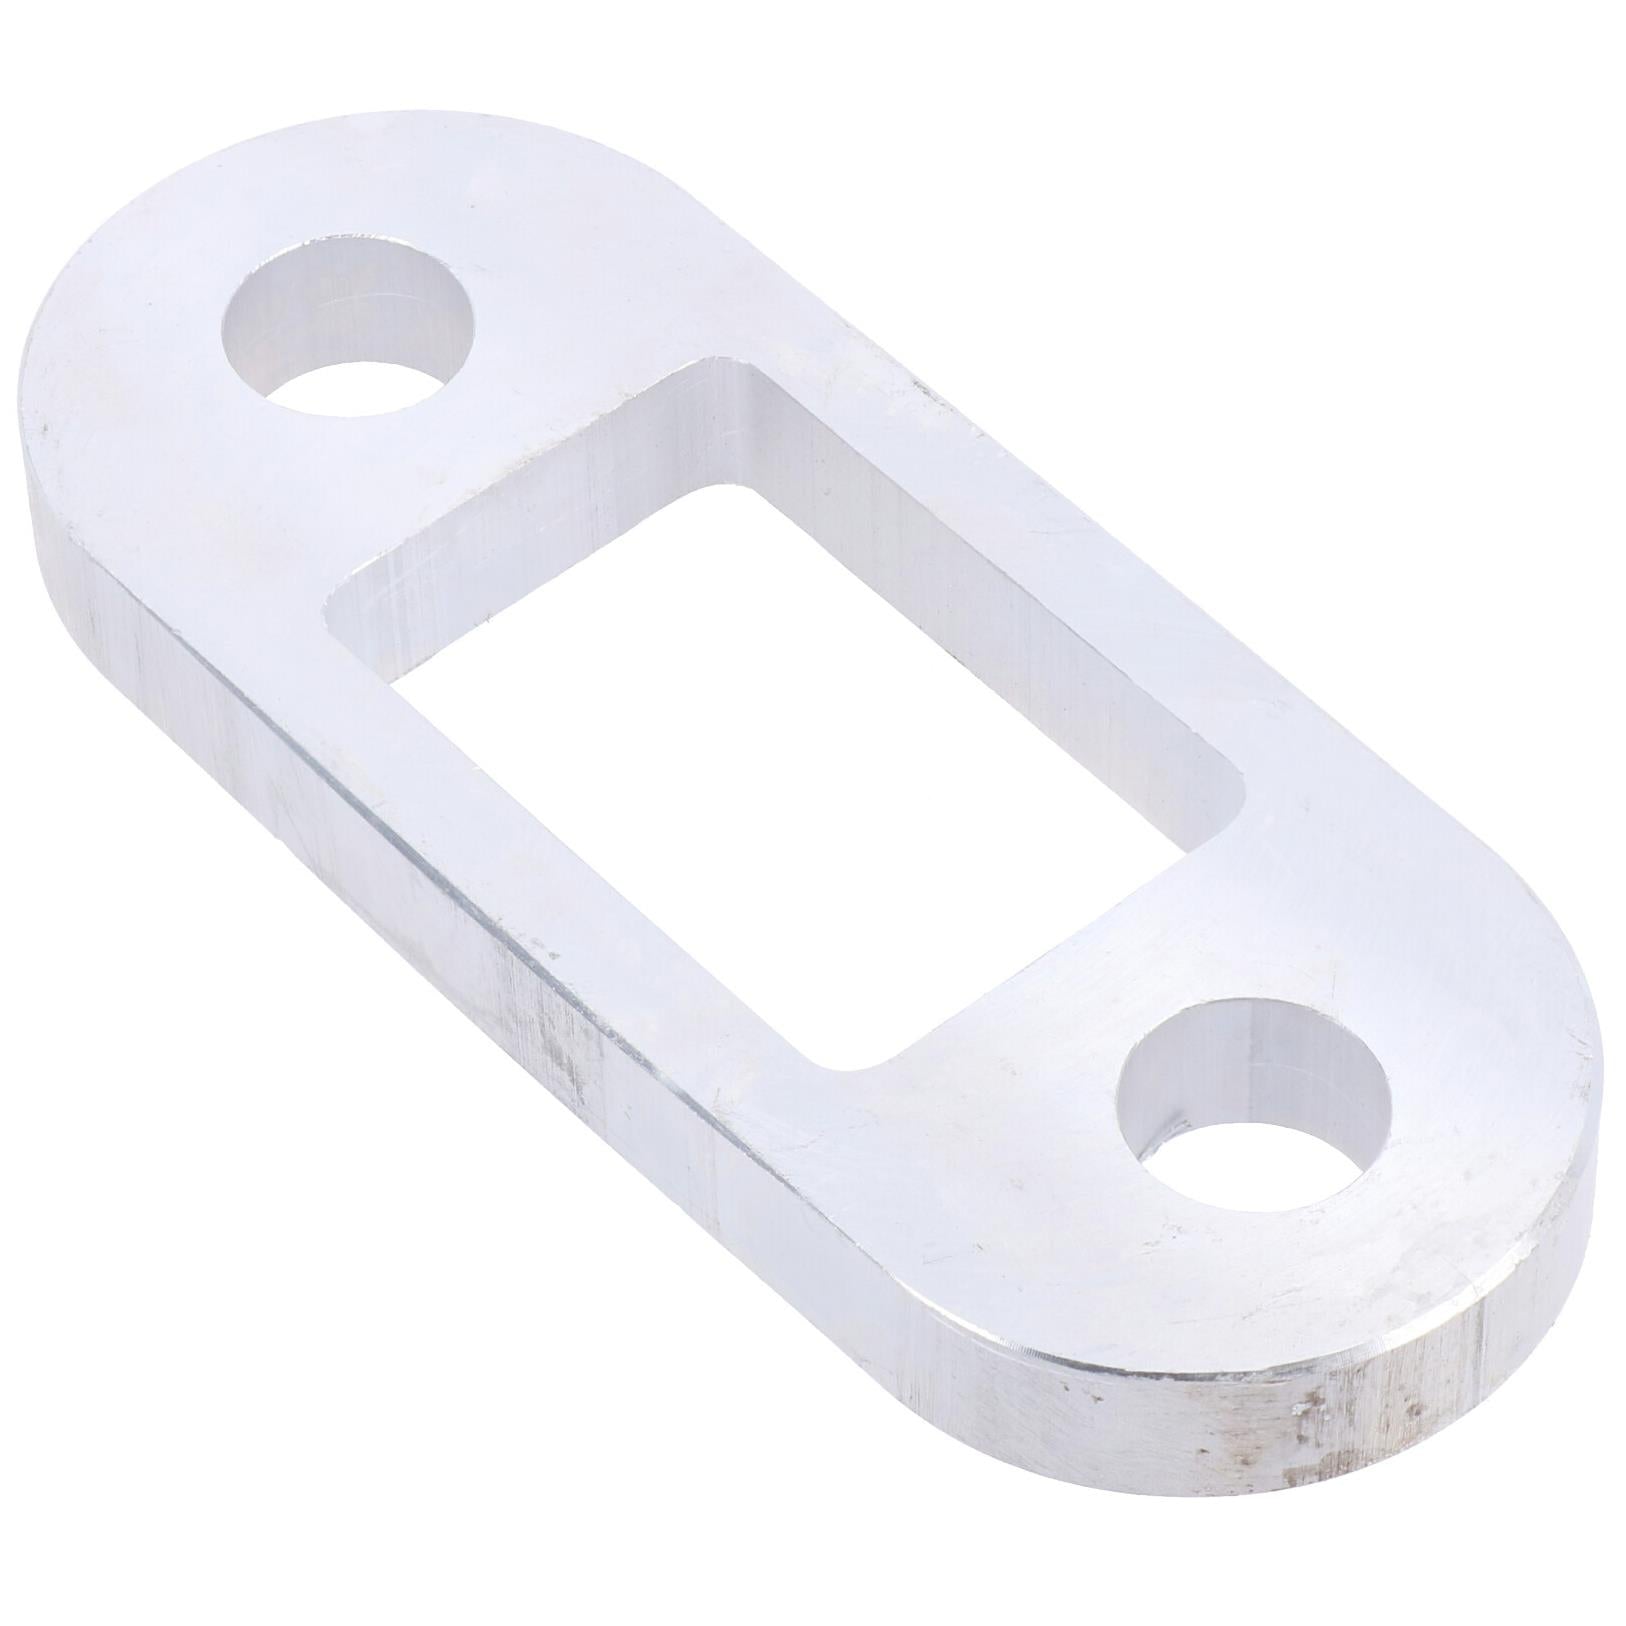 Tow Bar / Ball Spacer for Trailers and Caravans